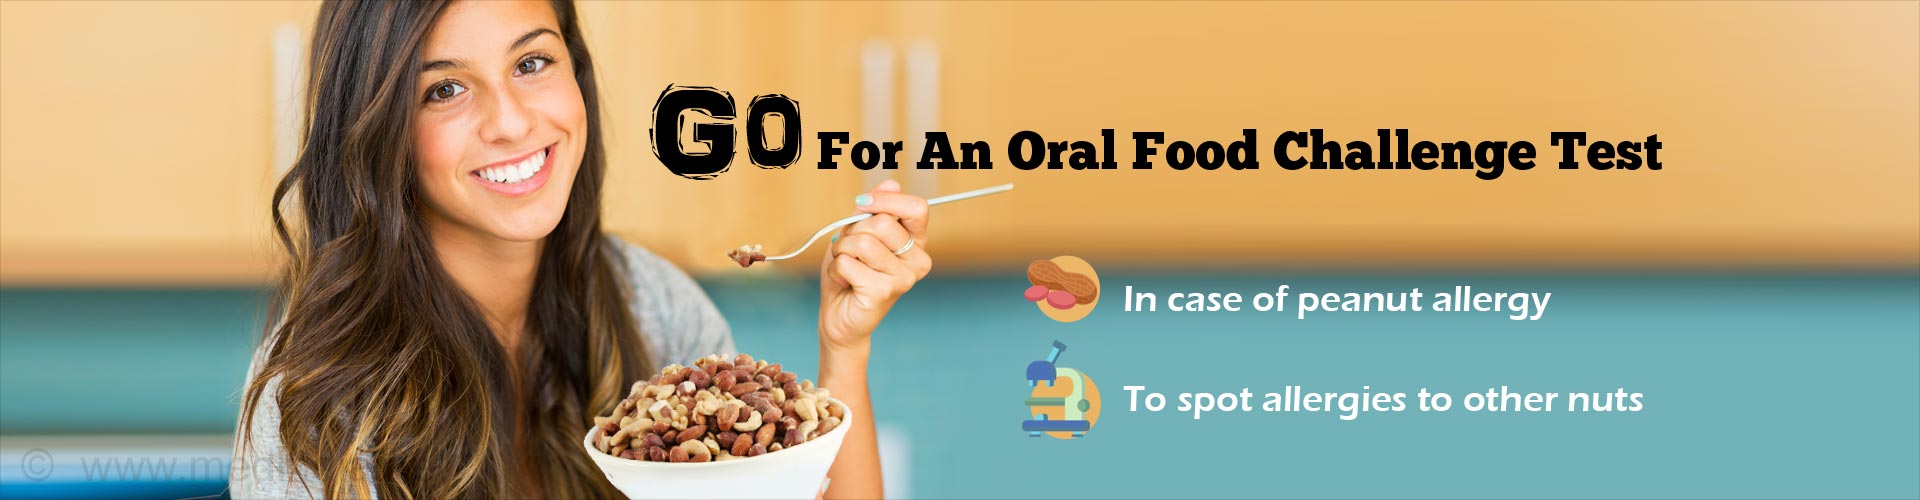 go for an oral food challenge test
- in case of peanut allergy
- to spot allergies to other nuts